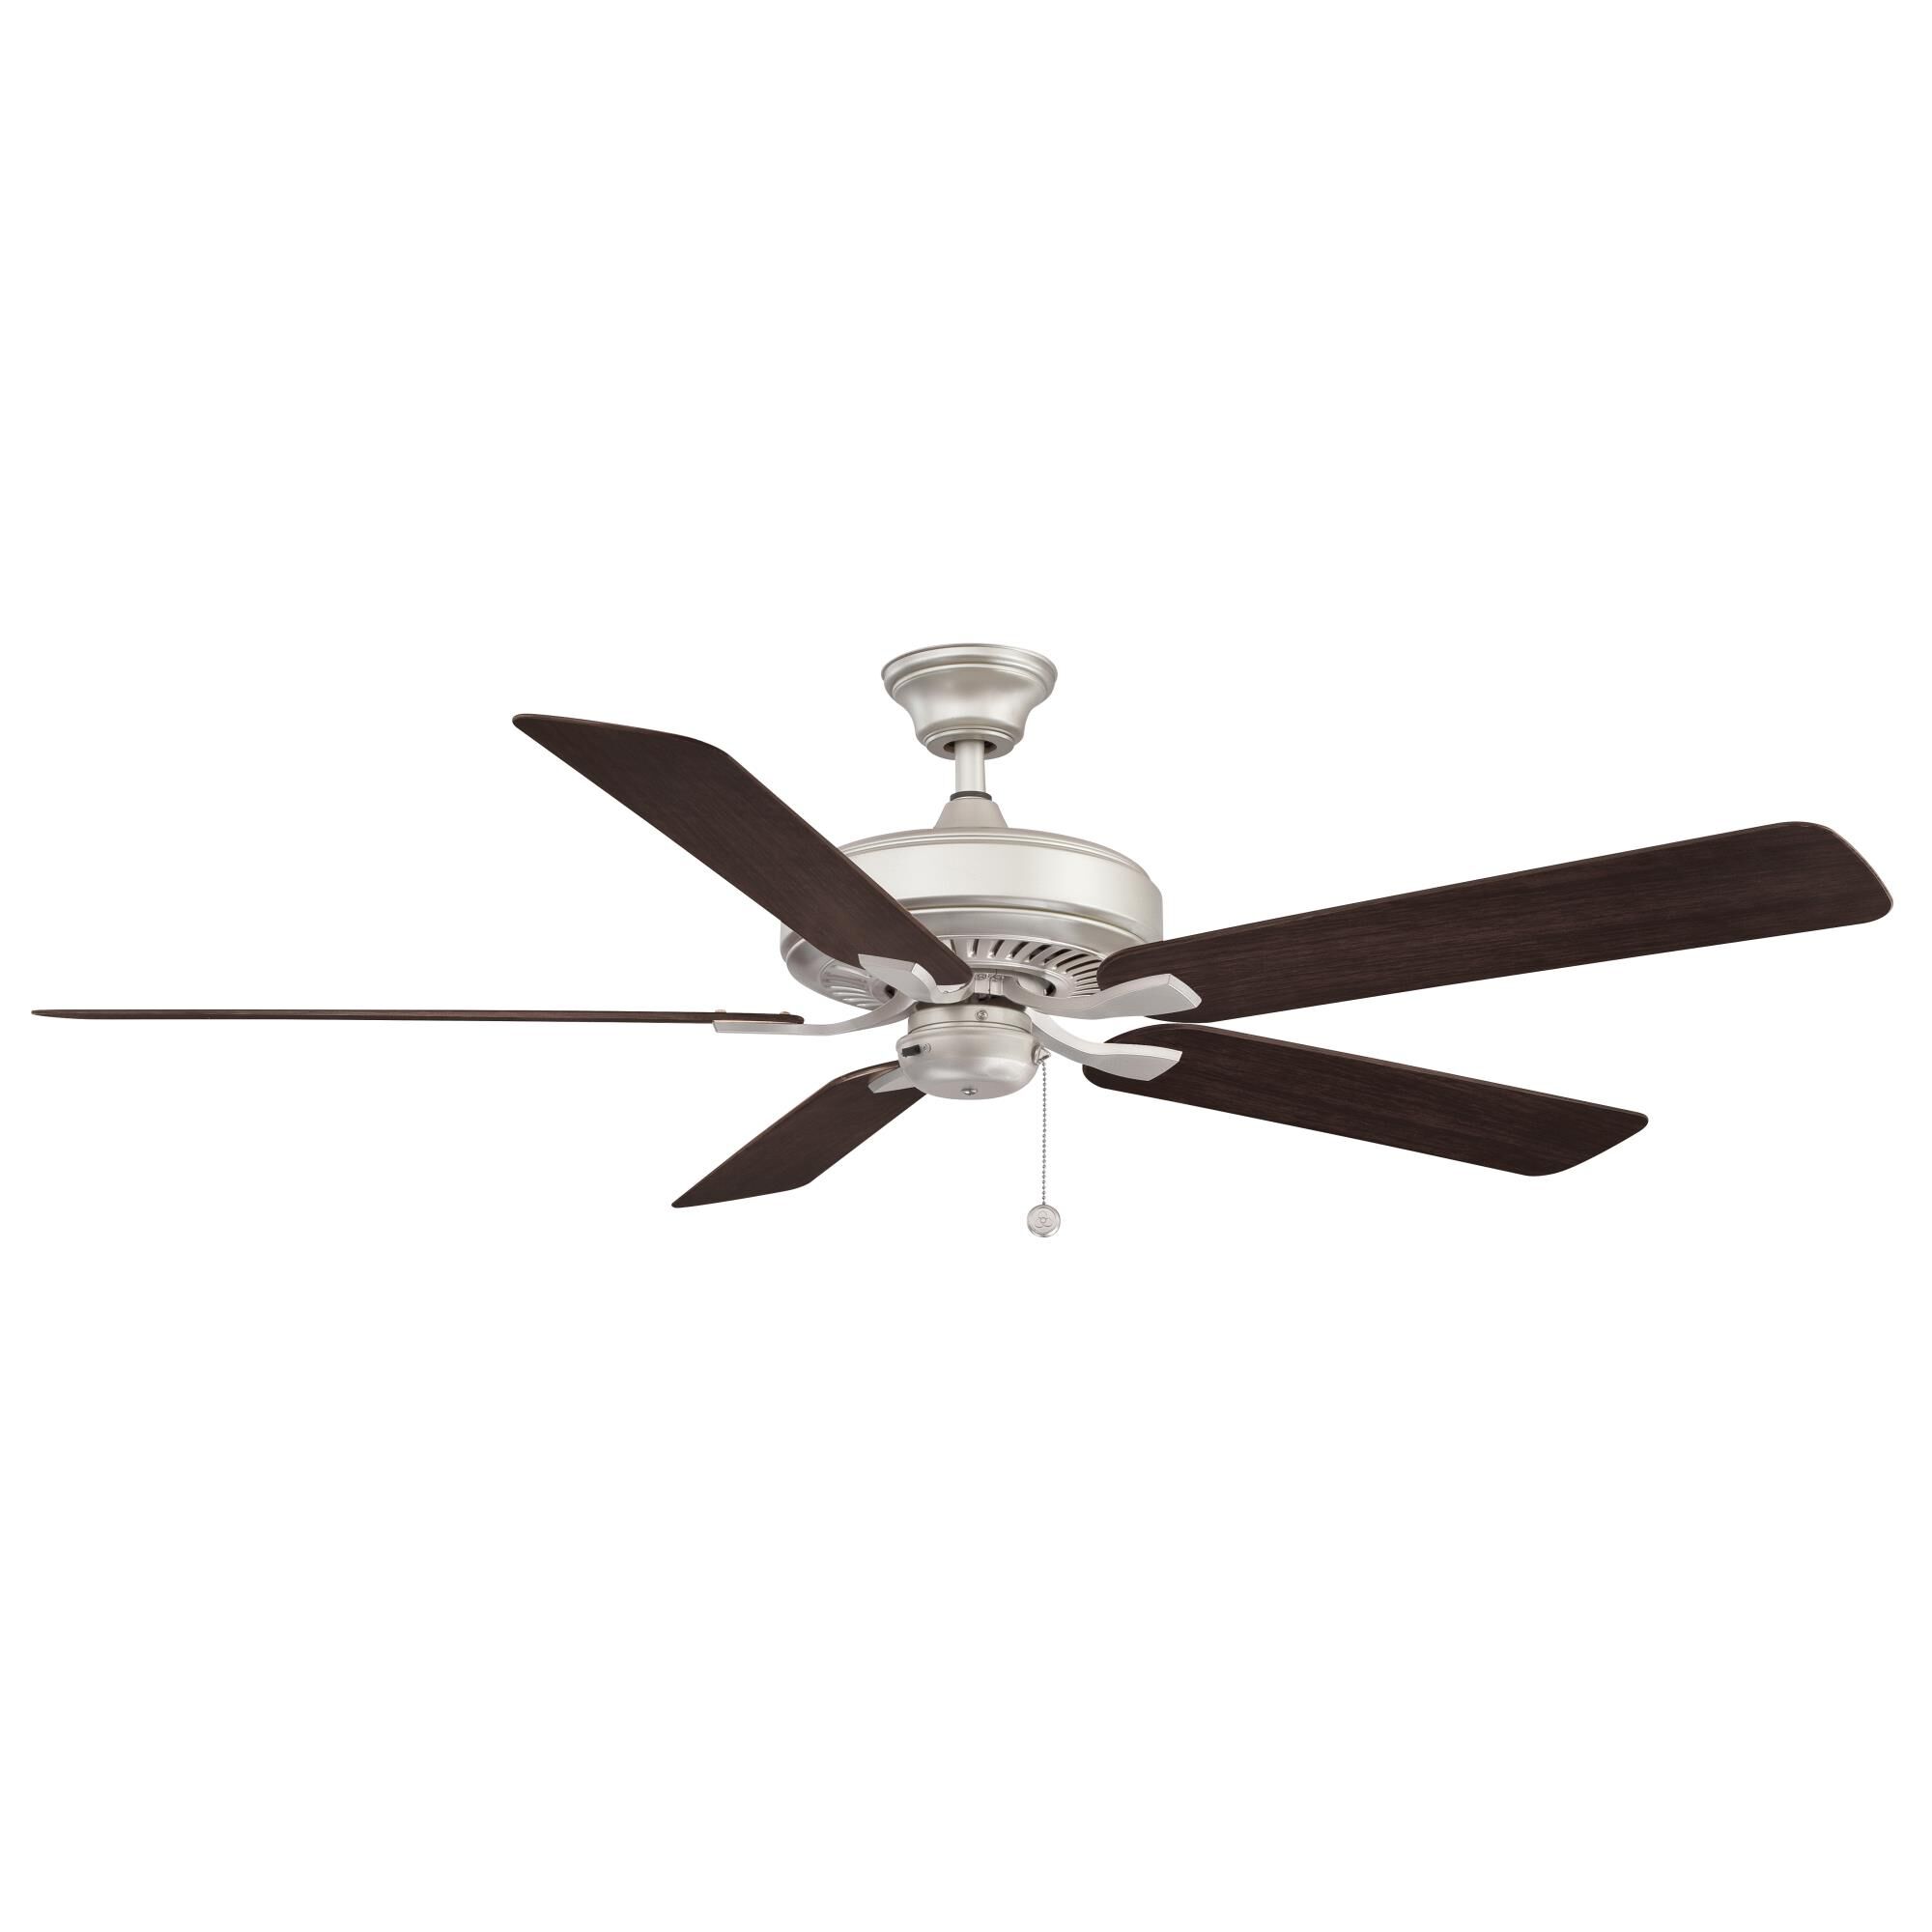 Photos - Fan imation Edgewood Outdoor Rated 60 Inch Ceiling  Edgewood - FP9060BNW